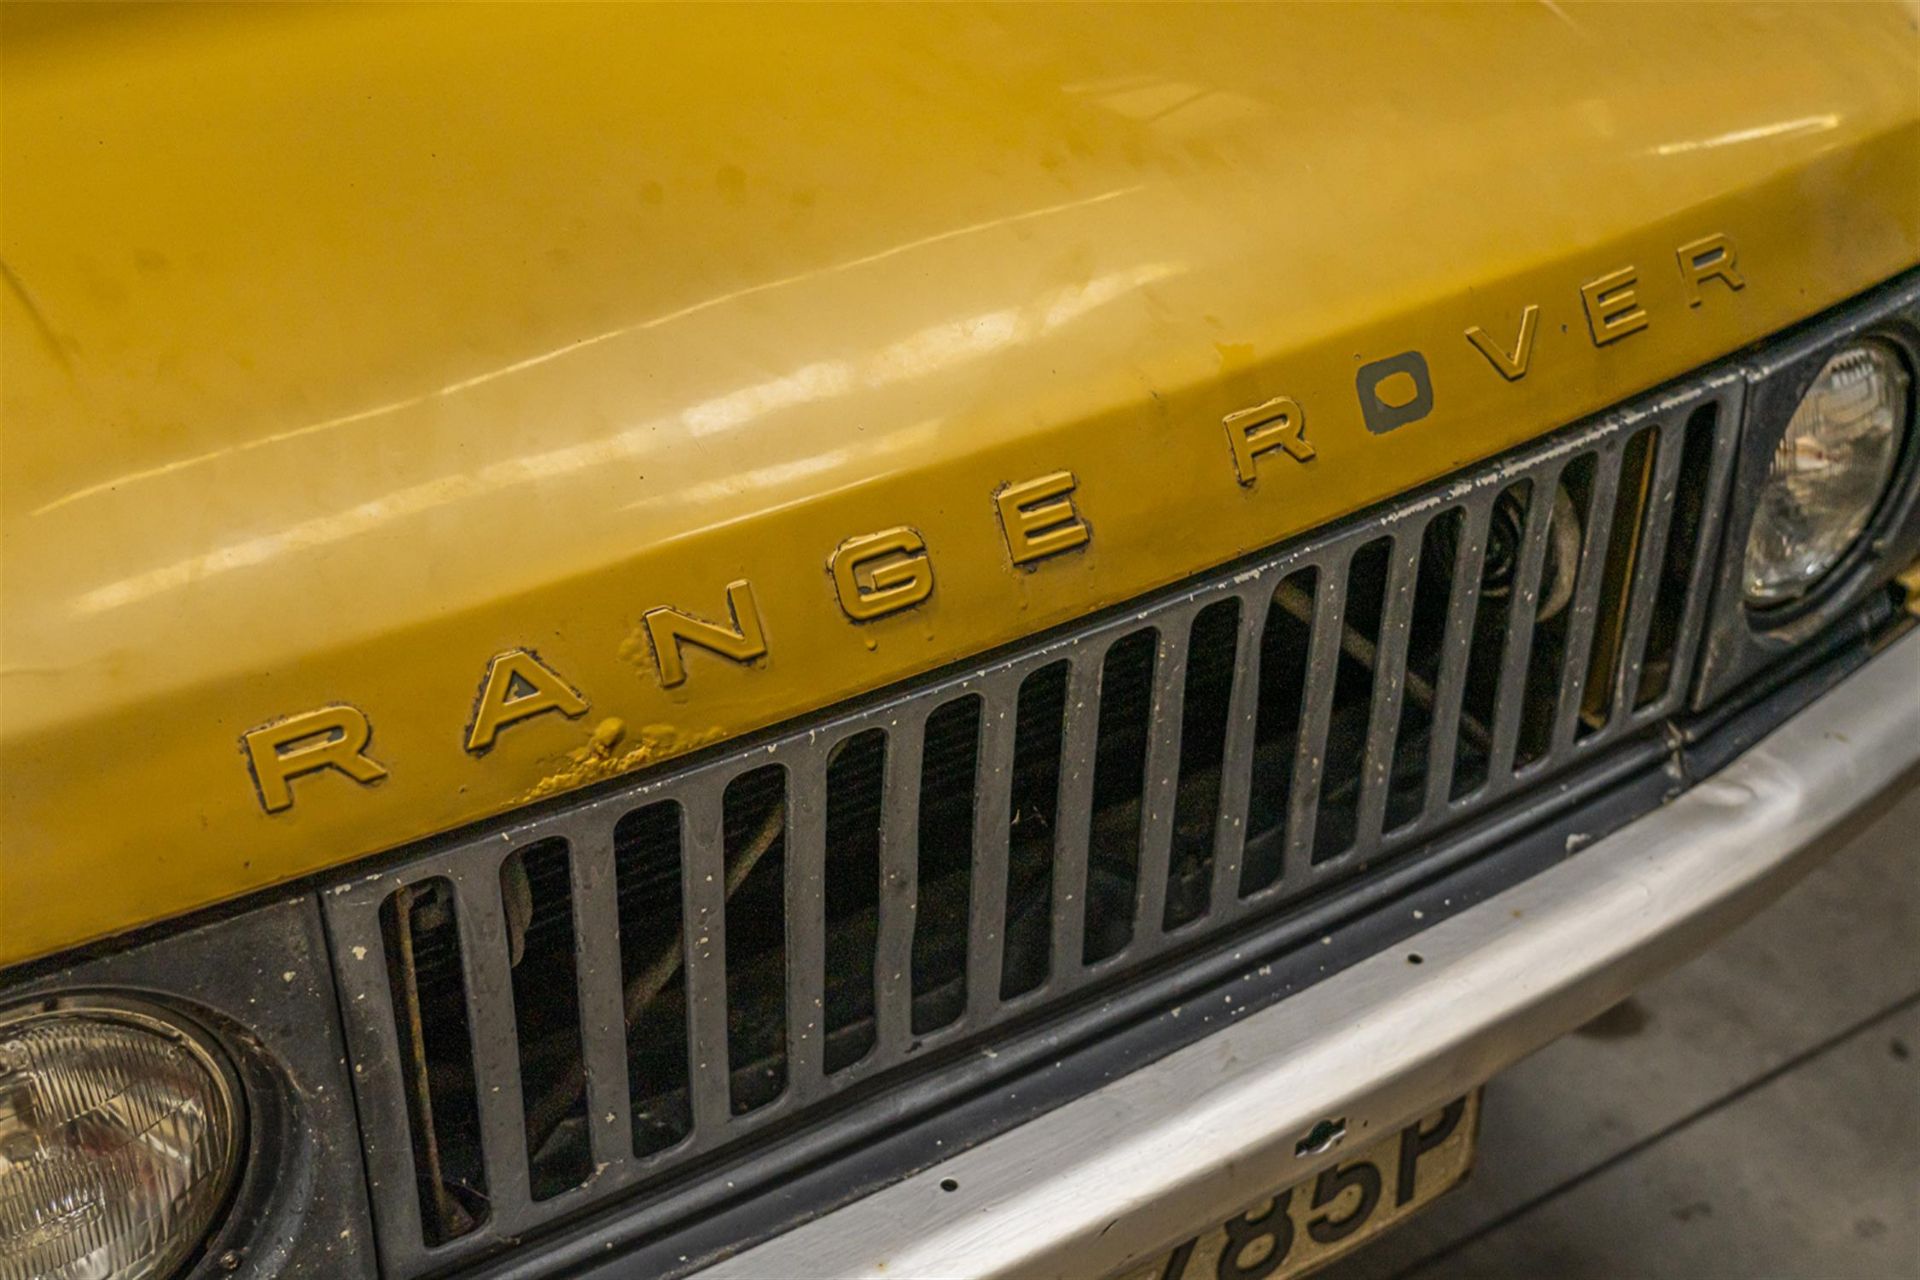 1972 Range Rover Classic 'Suffix A' - Image 5 of 5